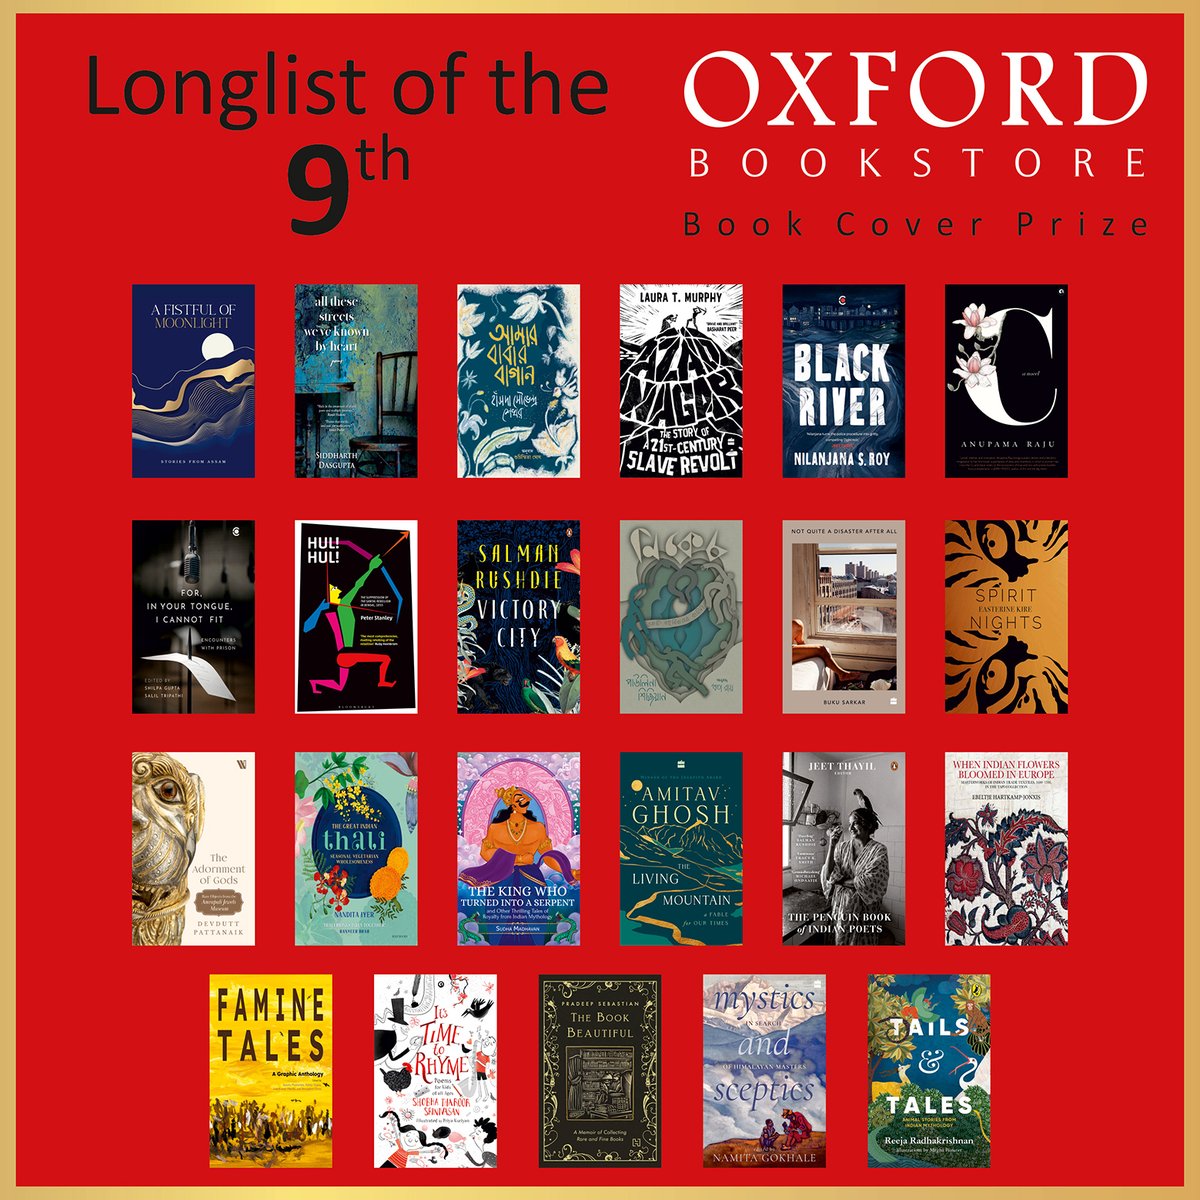 As many as three JUP titles in the longlist of the 9th Oxford Book Cover Prize. Best of luck to the designers Paromita Brahmachari, @DebkumarMitra , and @trinankur . We are also chuffed that two of JUP's titles are in Bengali-the only two non-English titles in a field of 24.